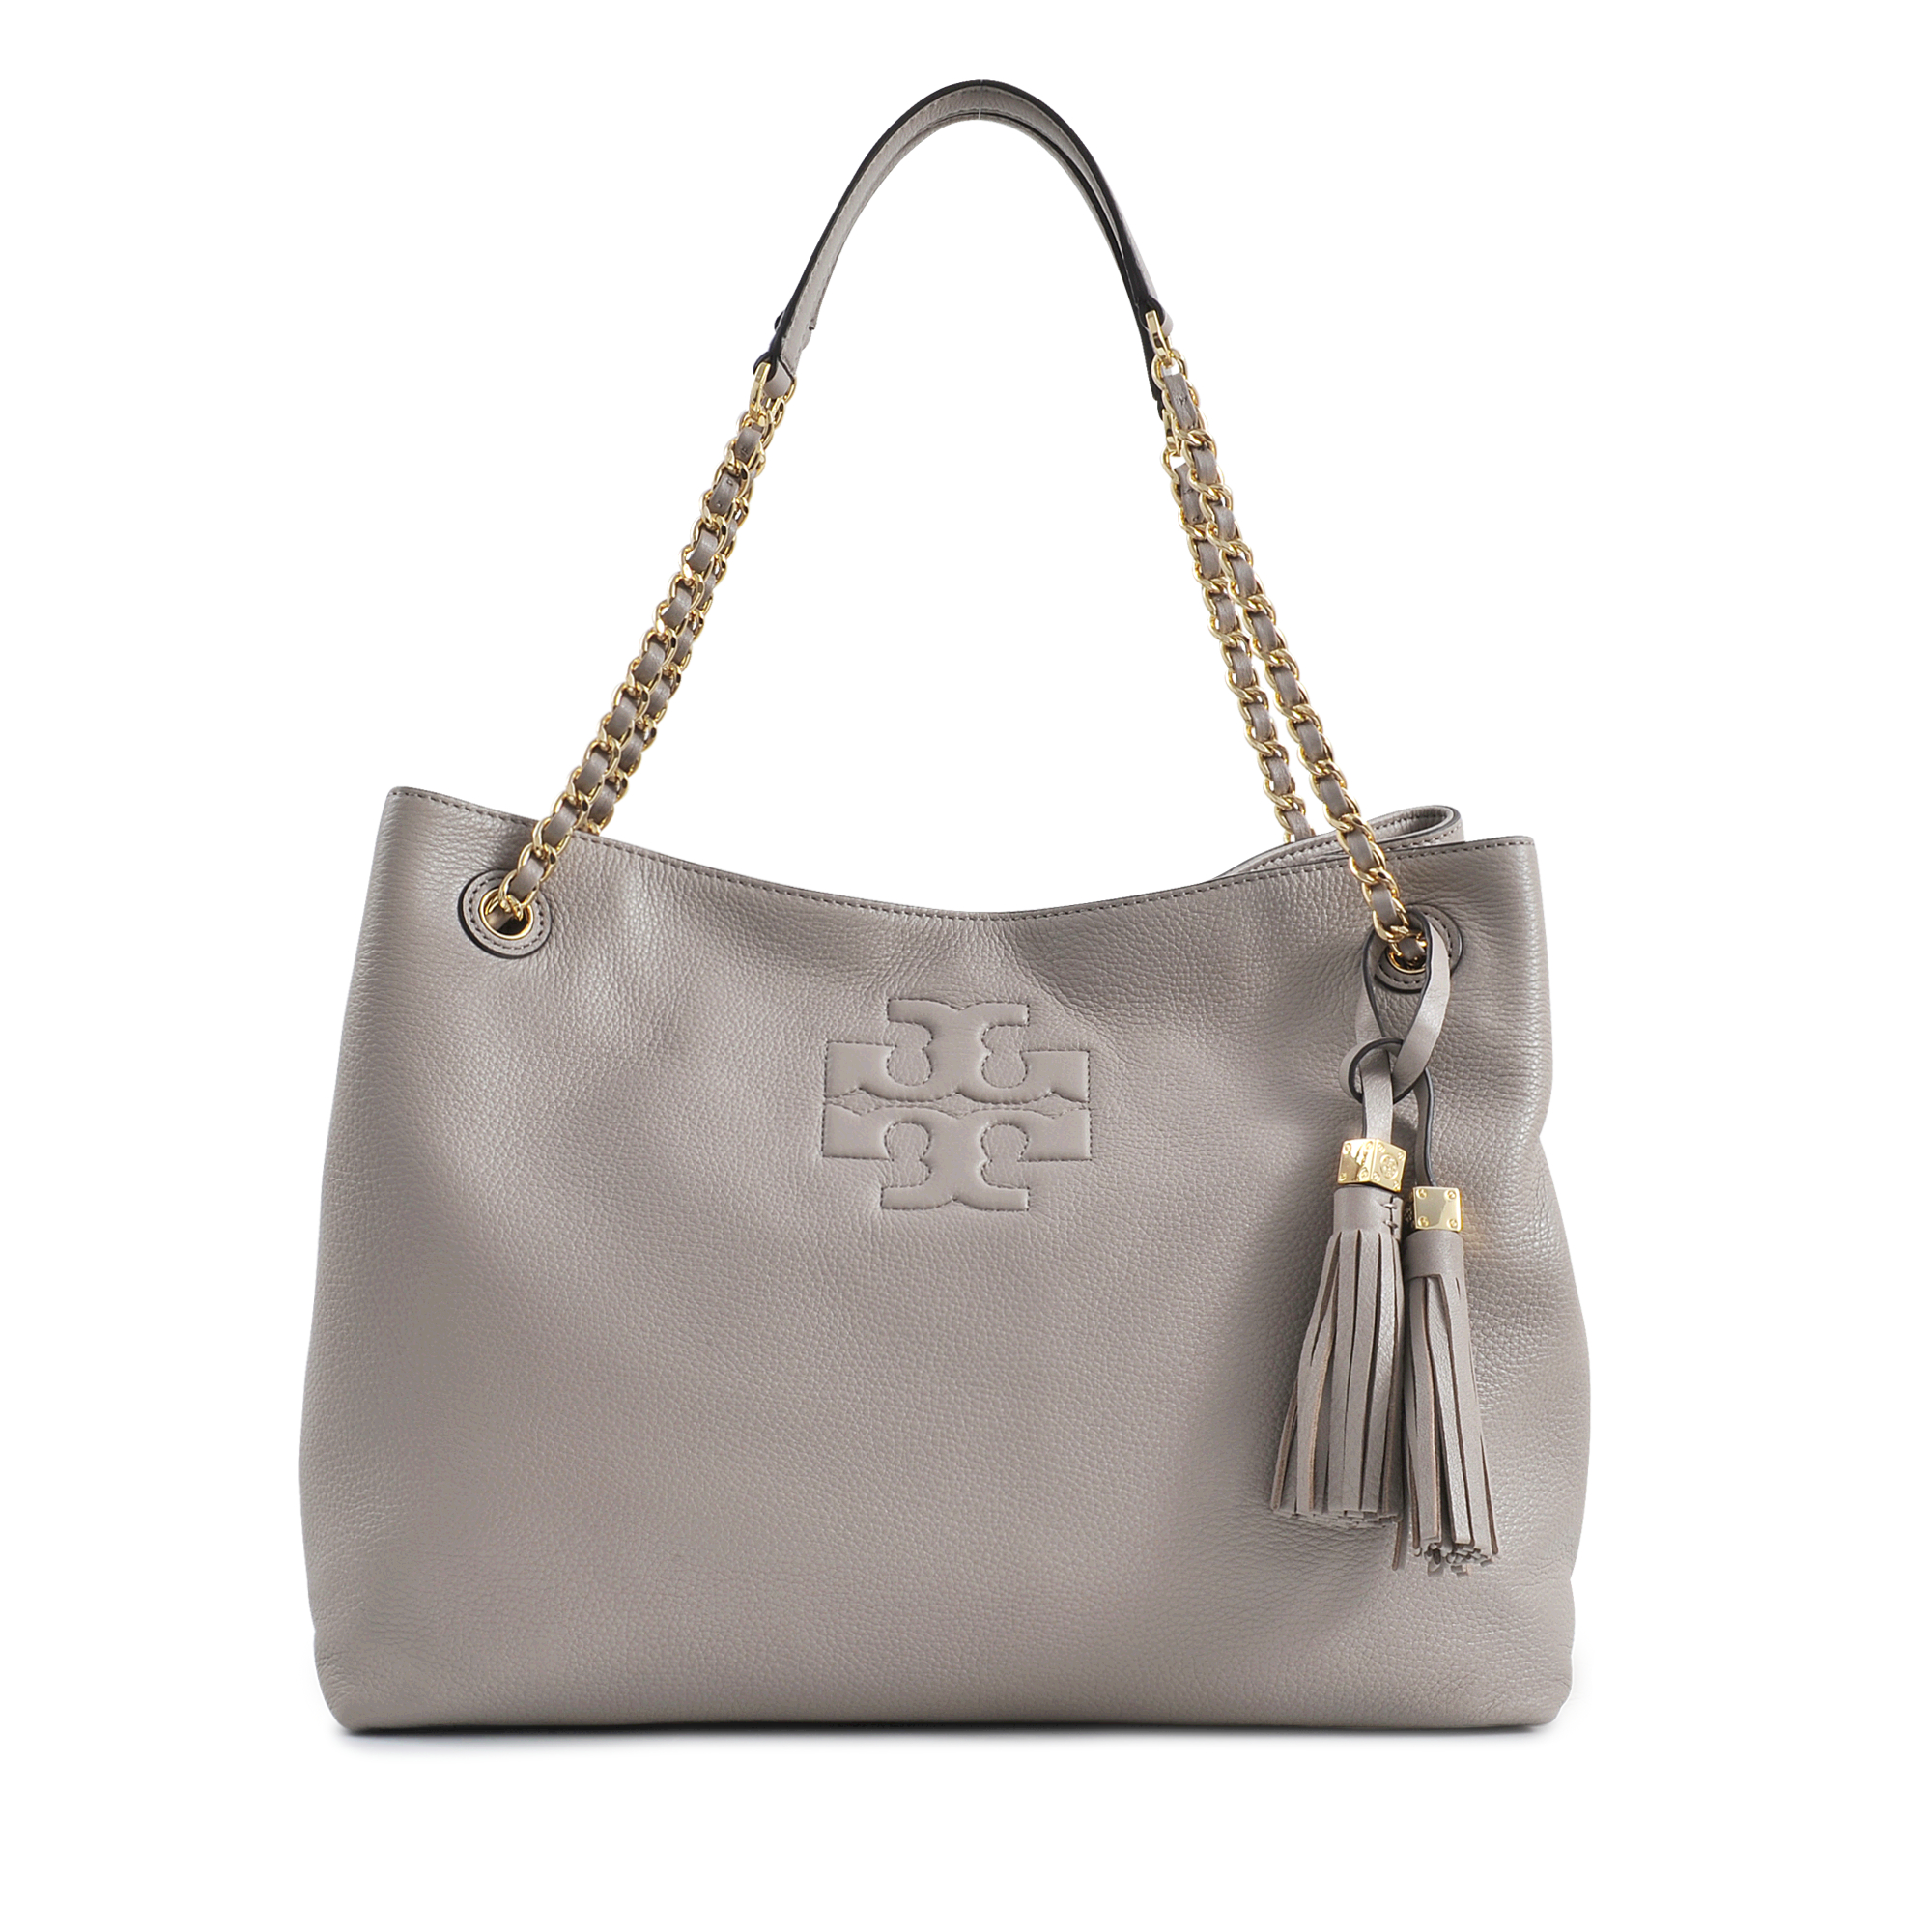 Tory Burch Thea Chain Shoulder Slouchy Tote in Gray | Lyst